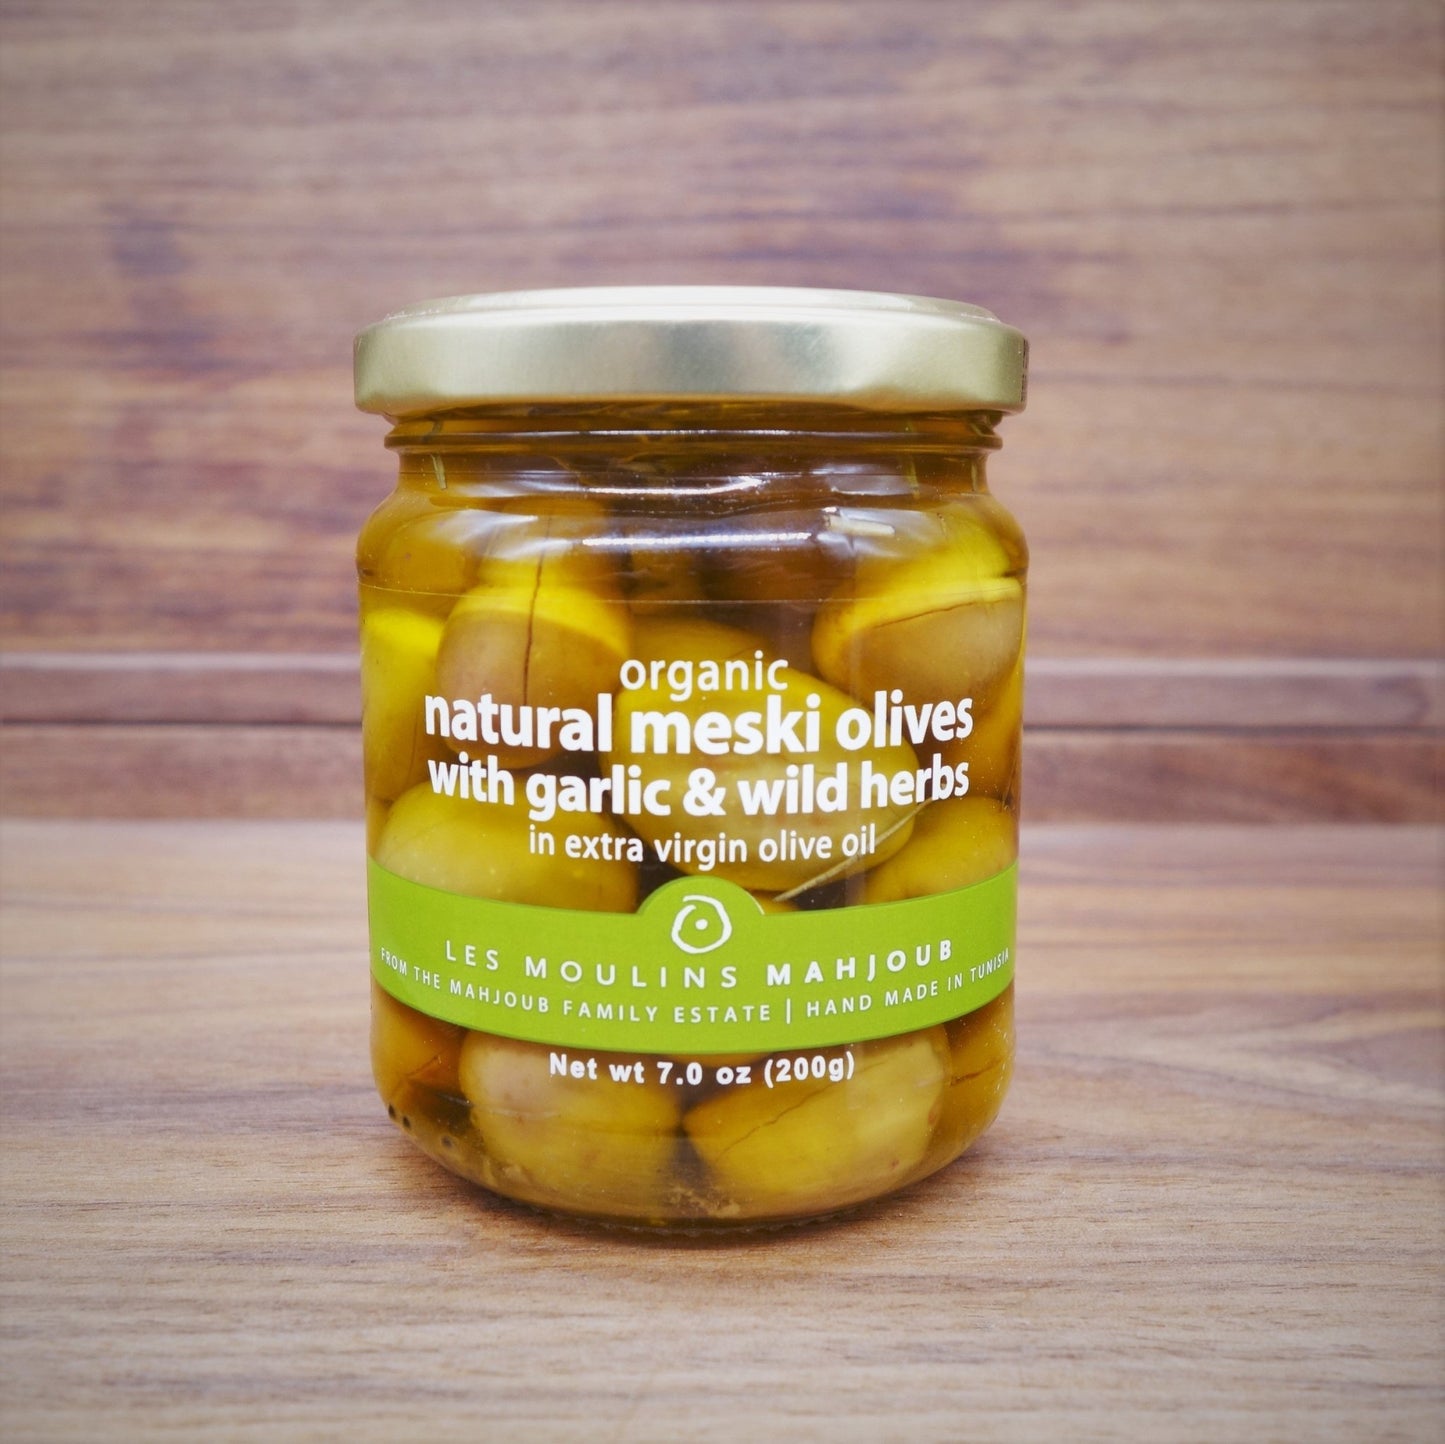 Les Moulins Mahjoub - Natural Meski Olives w/garlic and wild herbs - Mongers' Provisions